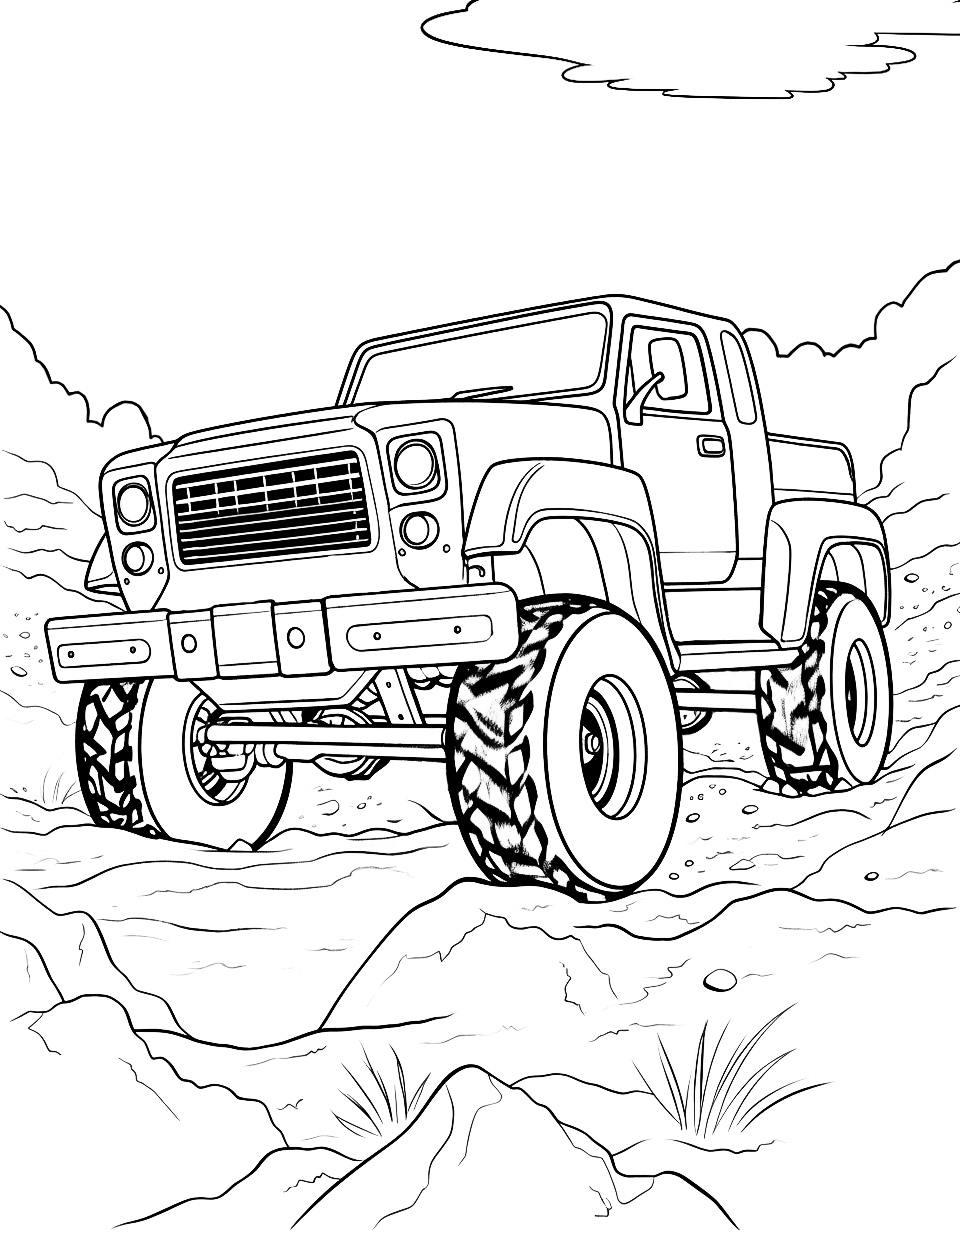 Off-Road Adventure Monster Truck Coloring Page - A rugged off-road monster truck trekking through muddy terrain.